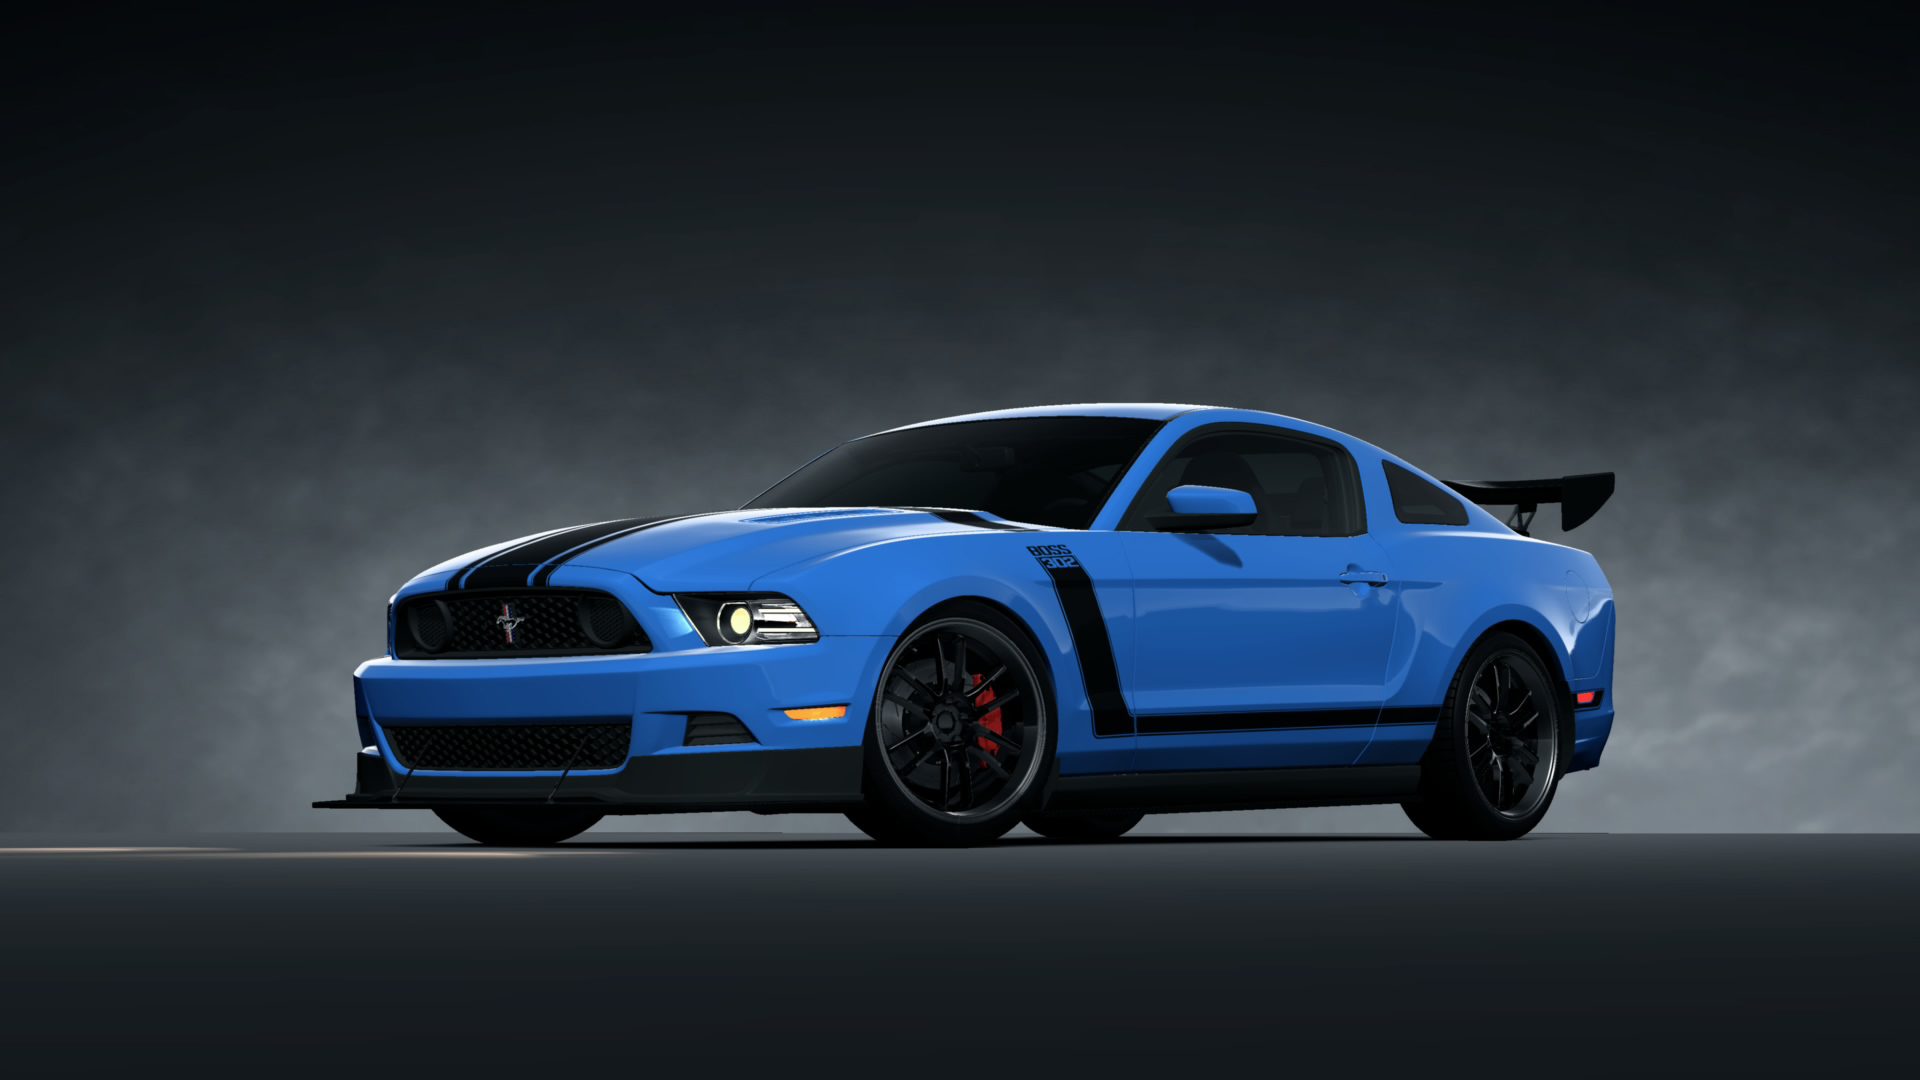 Ford Mustang Boss 302 '13 (03)